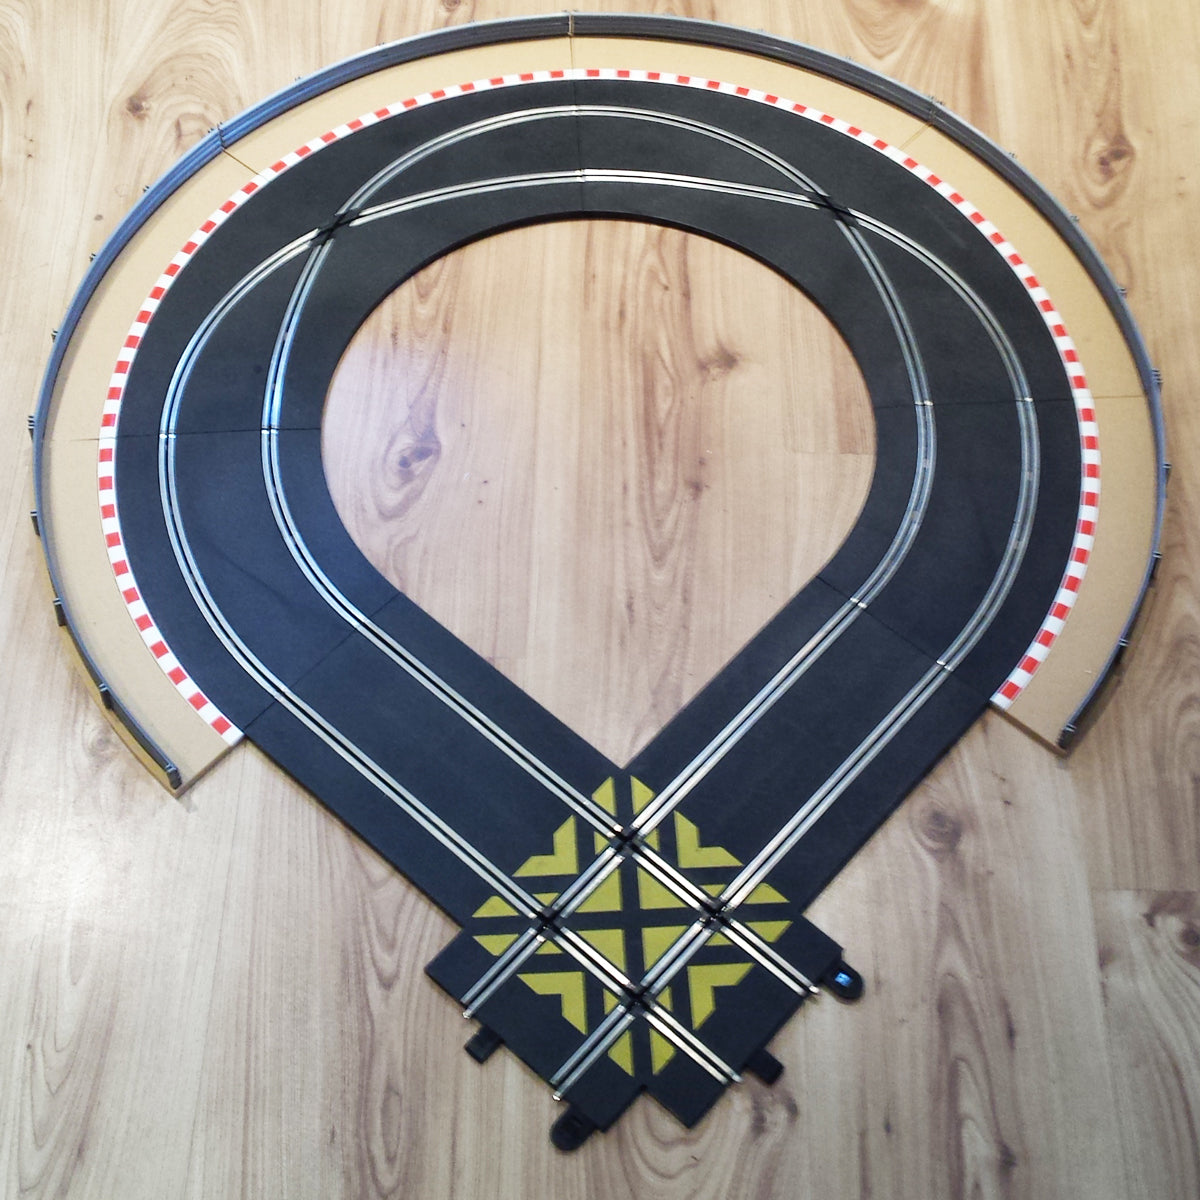 Scalextric Sport 1:32 Track Extension C8210, C8206, C8203 + Borders, Barriers #E - Action Slot Racing